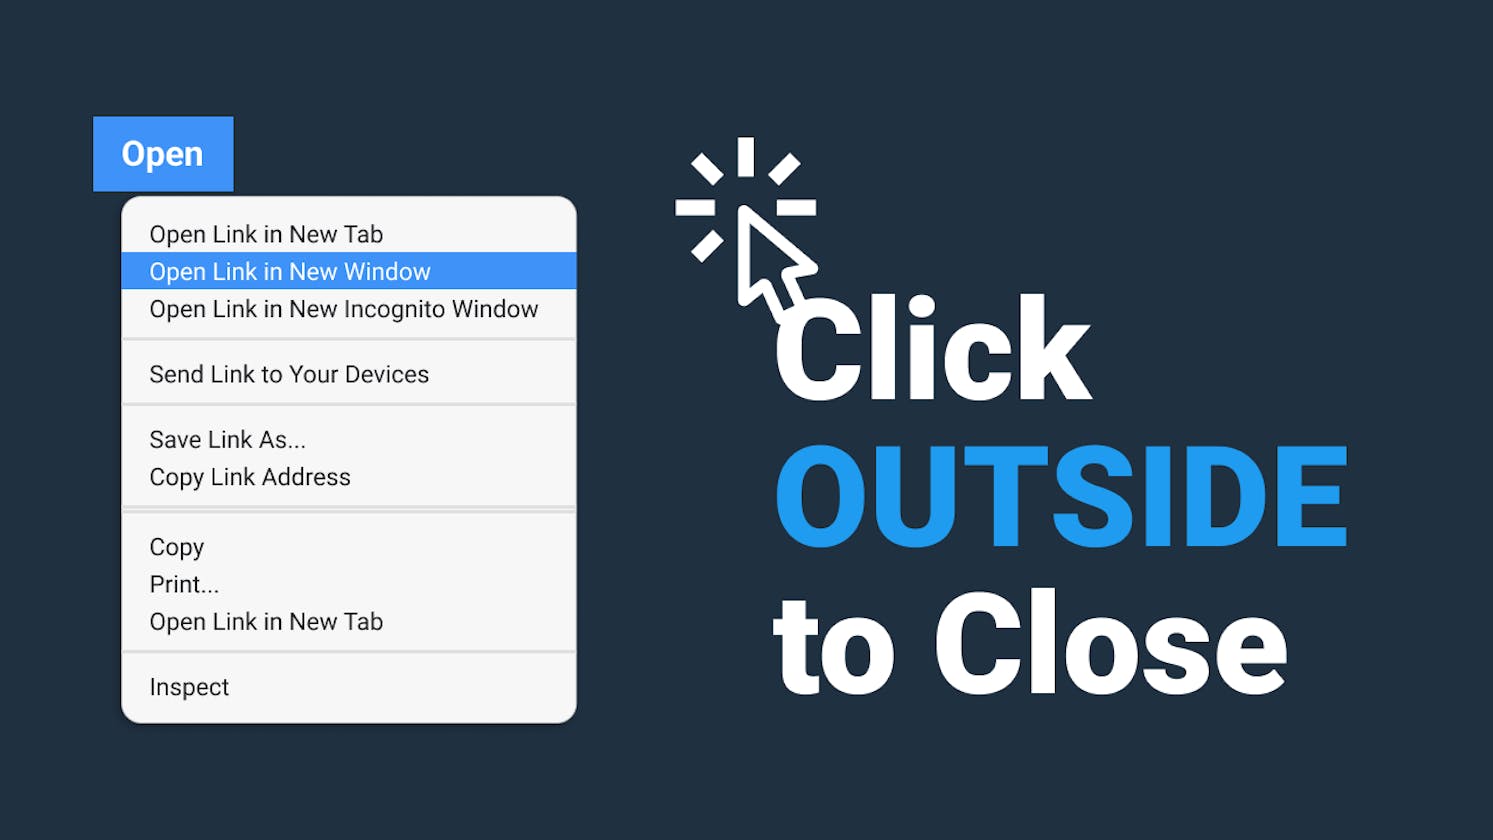 HOW TO: Click outside to close in Javascript